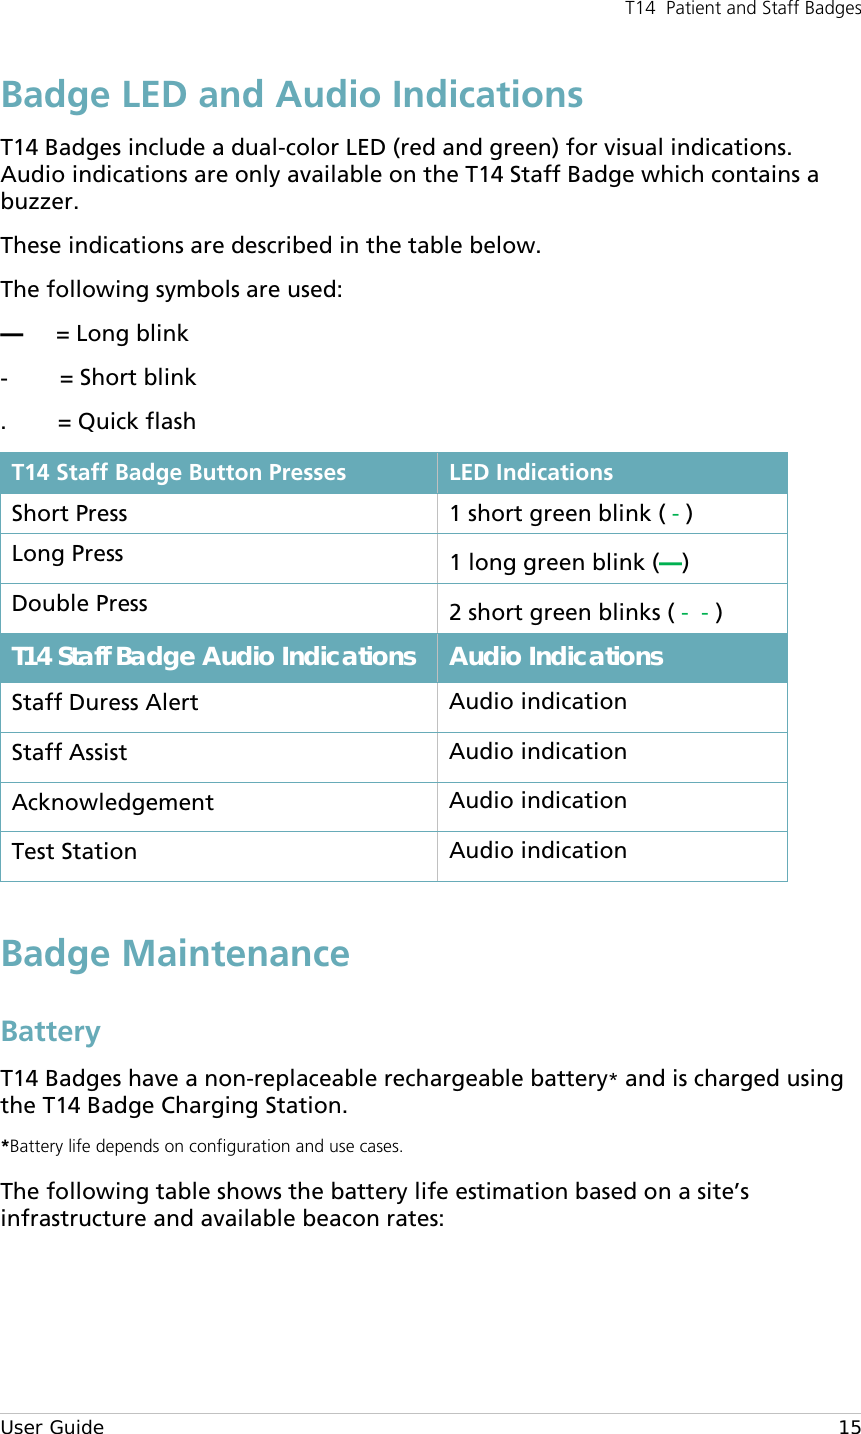 T14  Patient and Staff Badges  User Guide    15 Badge LED and Audio Indications T14 Badges include a dual-color LED (red and green) for visual indications. Audio indications are only available on the T14 Staff Badge which contains a buzzer.  These indications are described in the table below. The following symbols are used: —     = Long blink -         = Short blink .        = Quick flash T14 Staff Badge Button Presses LED Indications Short Press 1 short green blink ( - ) Long Press 1 long green blink (—) Double Press 2 short green blinks ( -  - ) T14 Staff Badge Audio Indications  Audio Indications Staff Duress Alert Audio indication Staff Assist Audio indication Acknowledgement Audio indication  Test Station   Audio indication Badge Maintenance Battery  T14 Badges have a non-replaceable rechargeable battery* and is charged using the T14 Badge Charging Station.  *Battery life depends on configuration and use cases.  The following table shows the battery life estimation based on a site’s infrastructure and available beacon rates:    